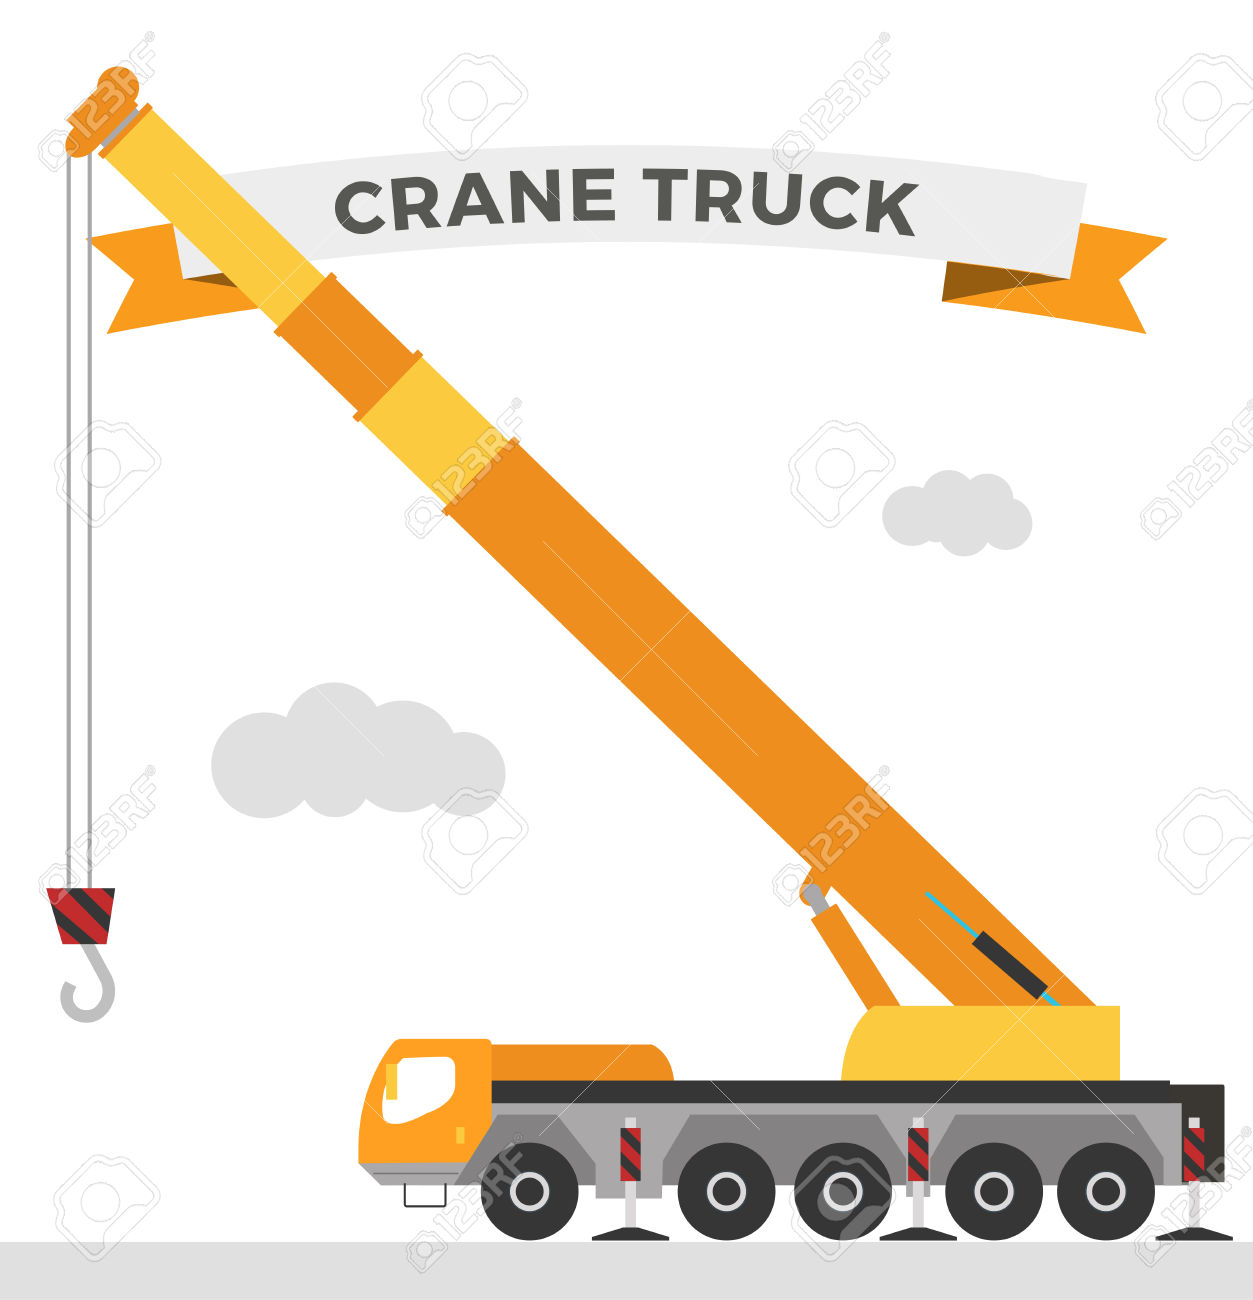 Industrial Crane Stock Photos Images, Royalty Free Industrial.